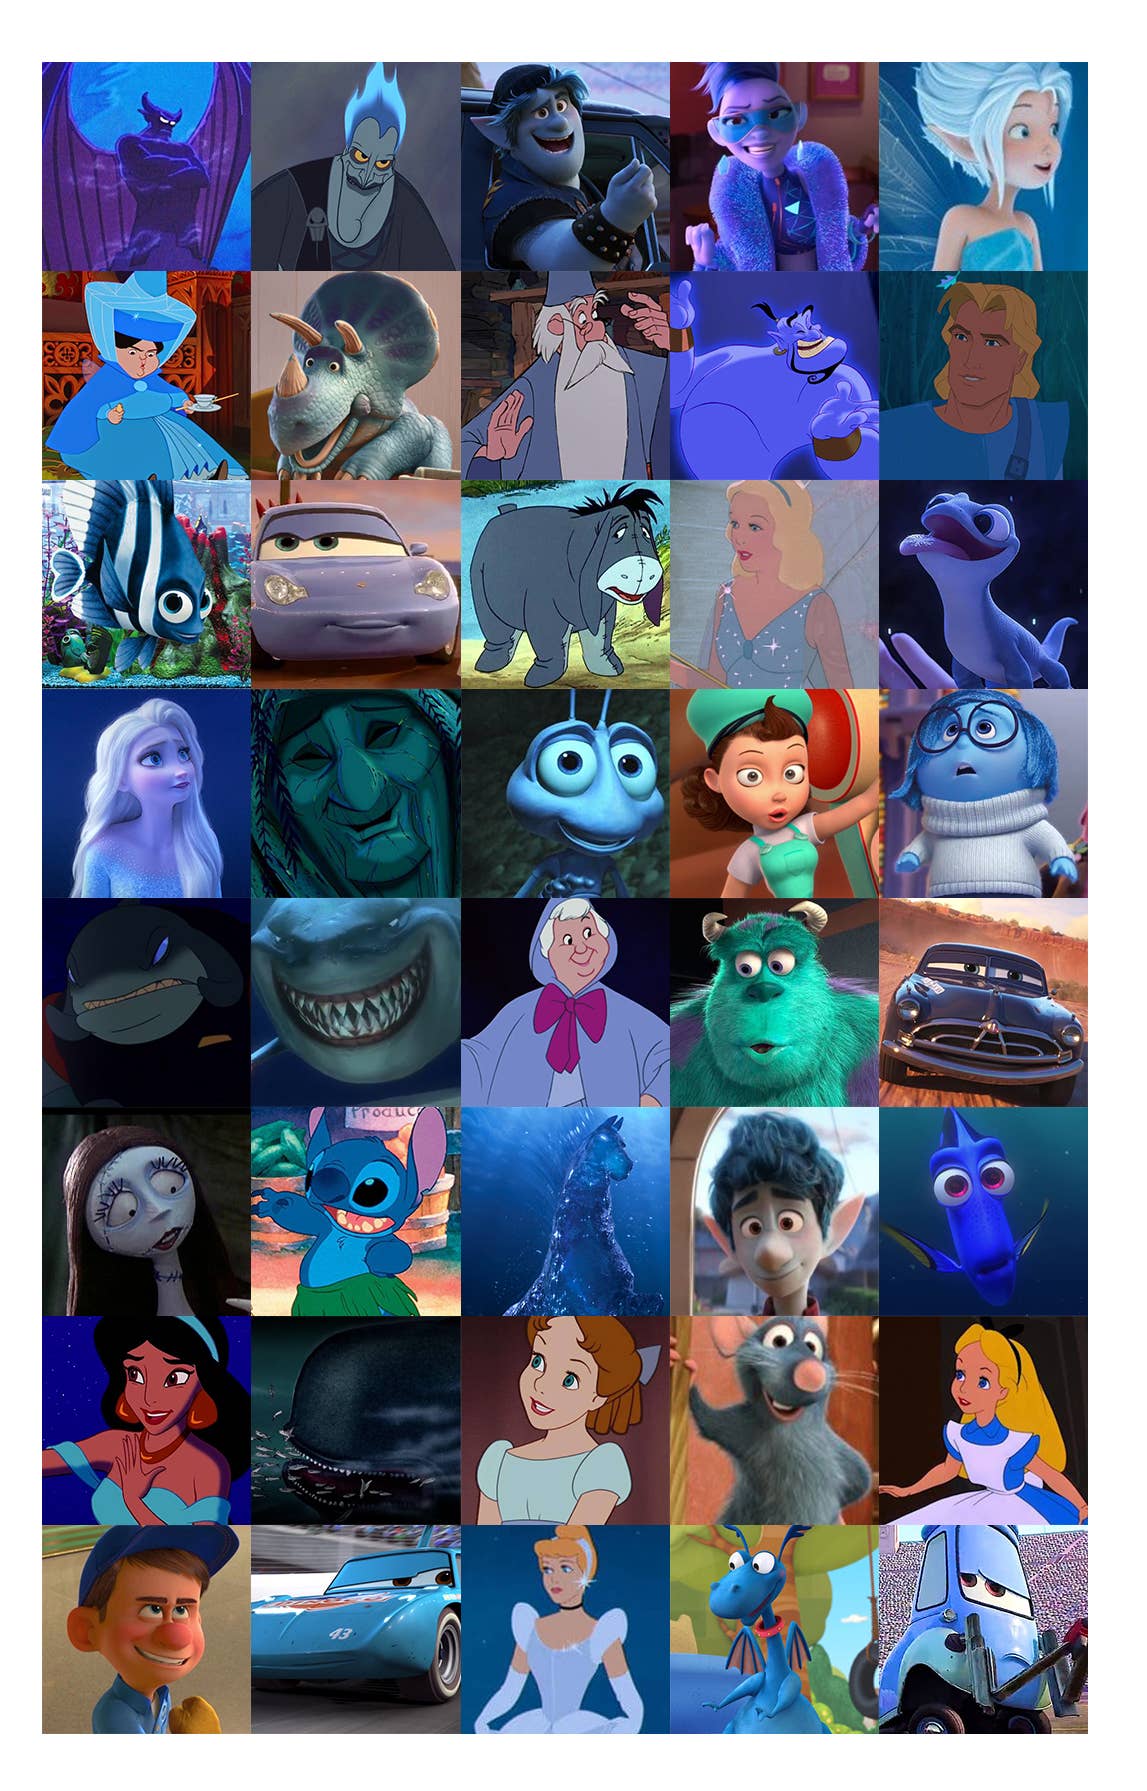 Most People Can't Identify 20/40 Of These Blue Disney Characters — Can You?